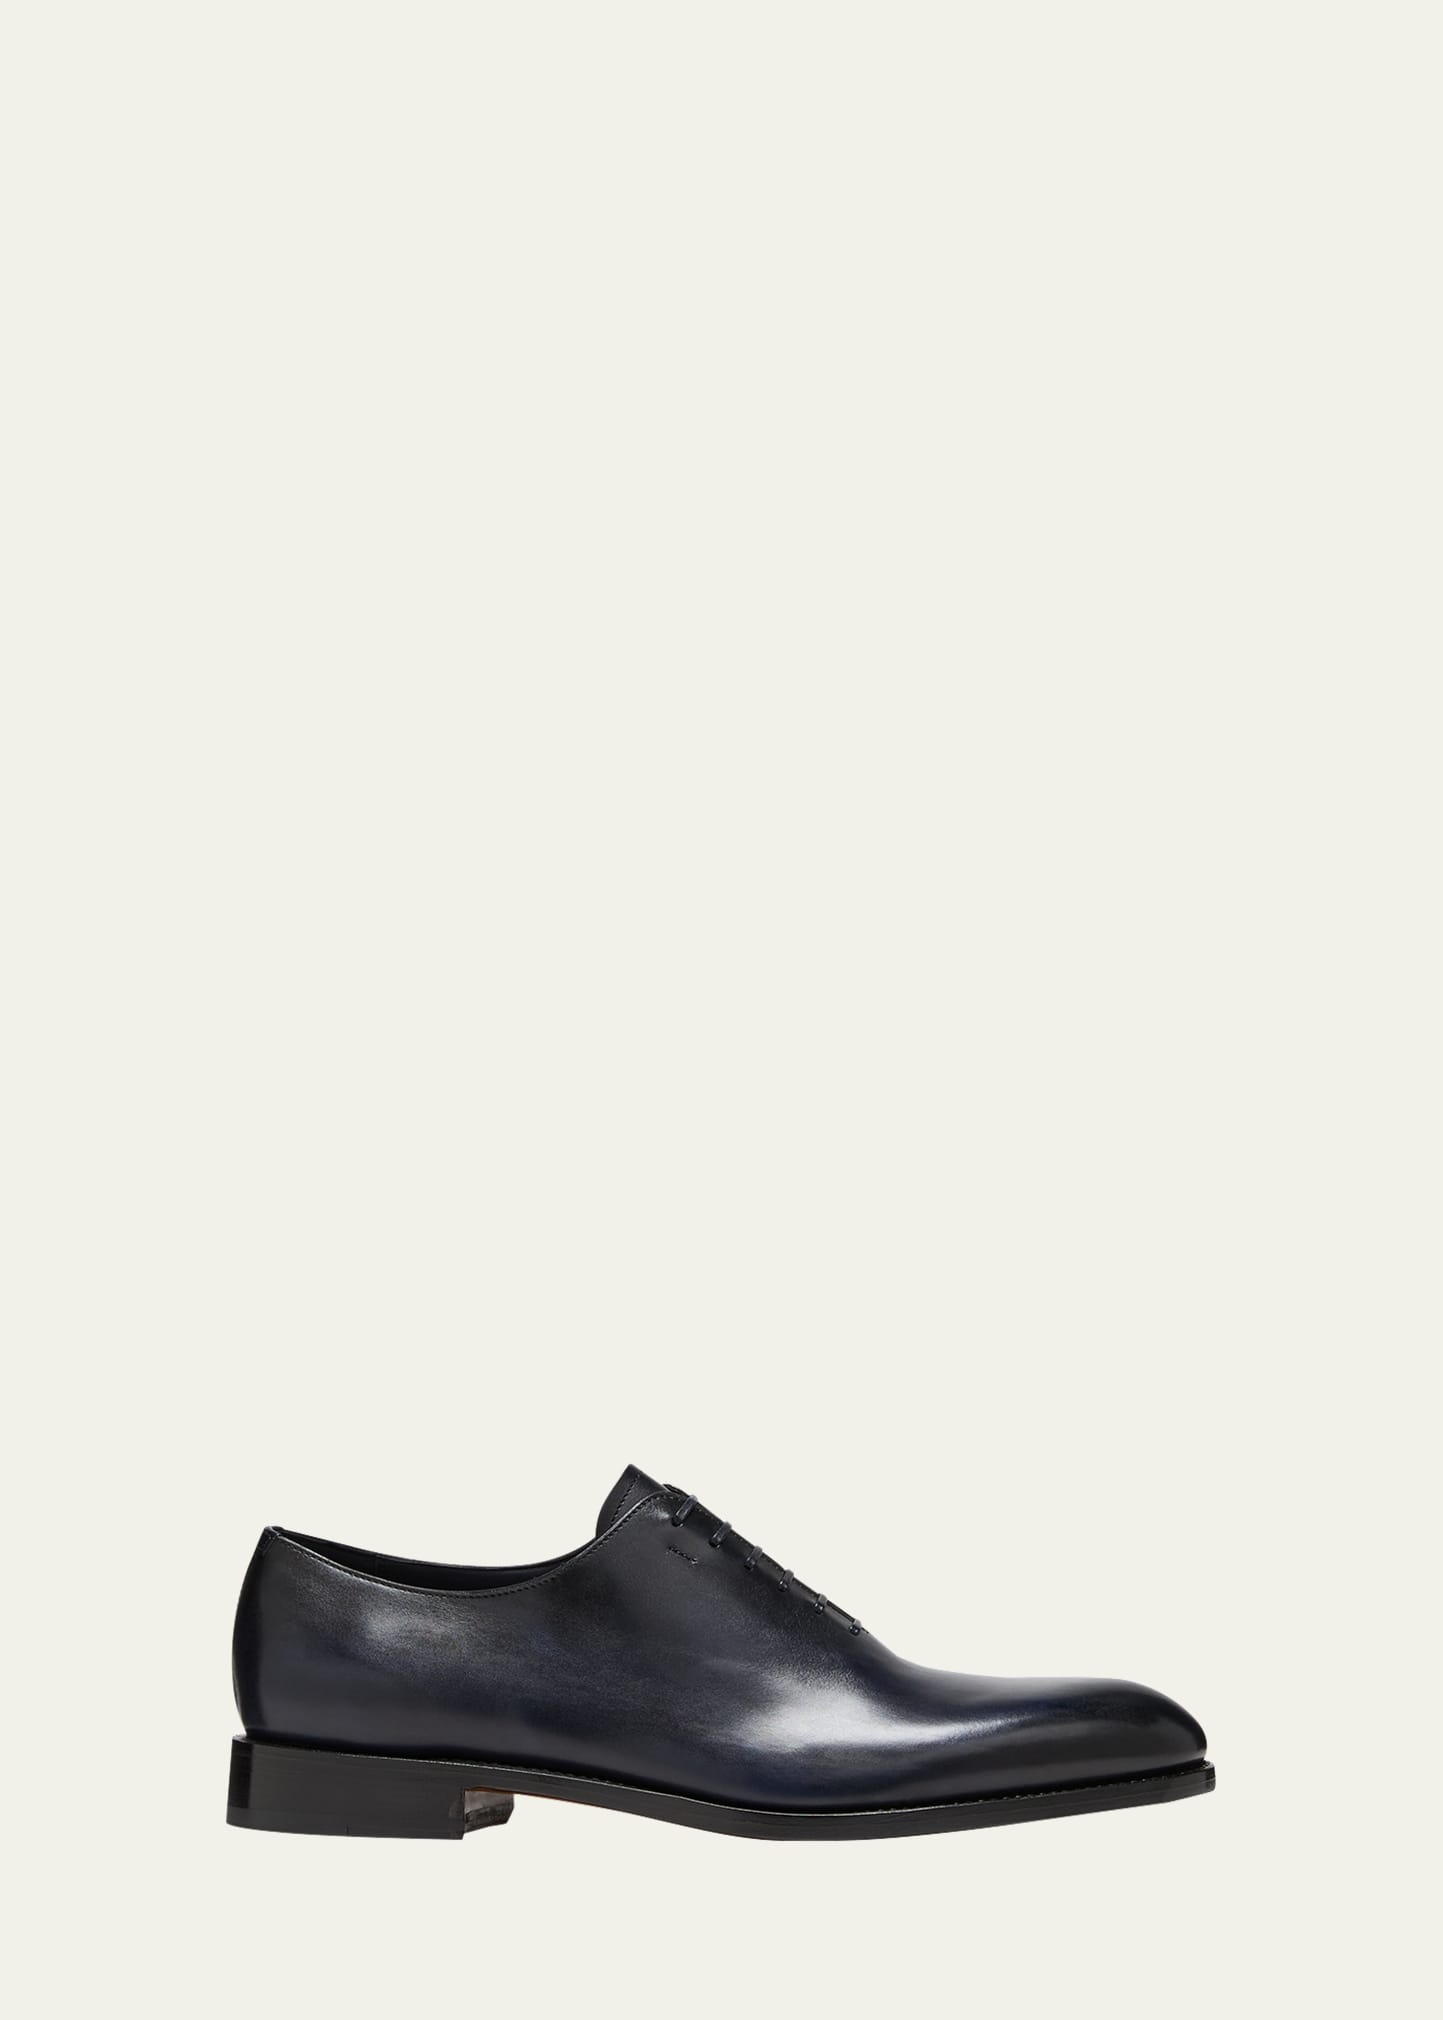 Men's Angiolo Wholecut Leather Oxfords